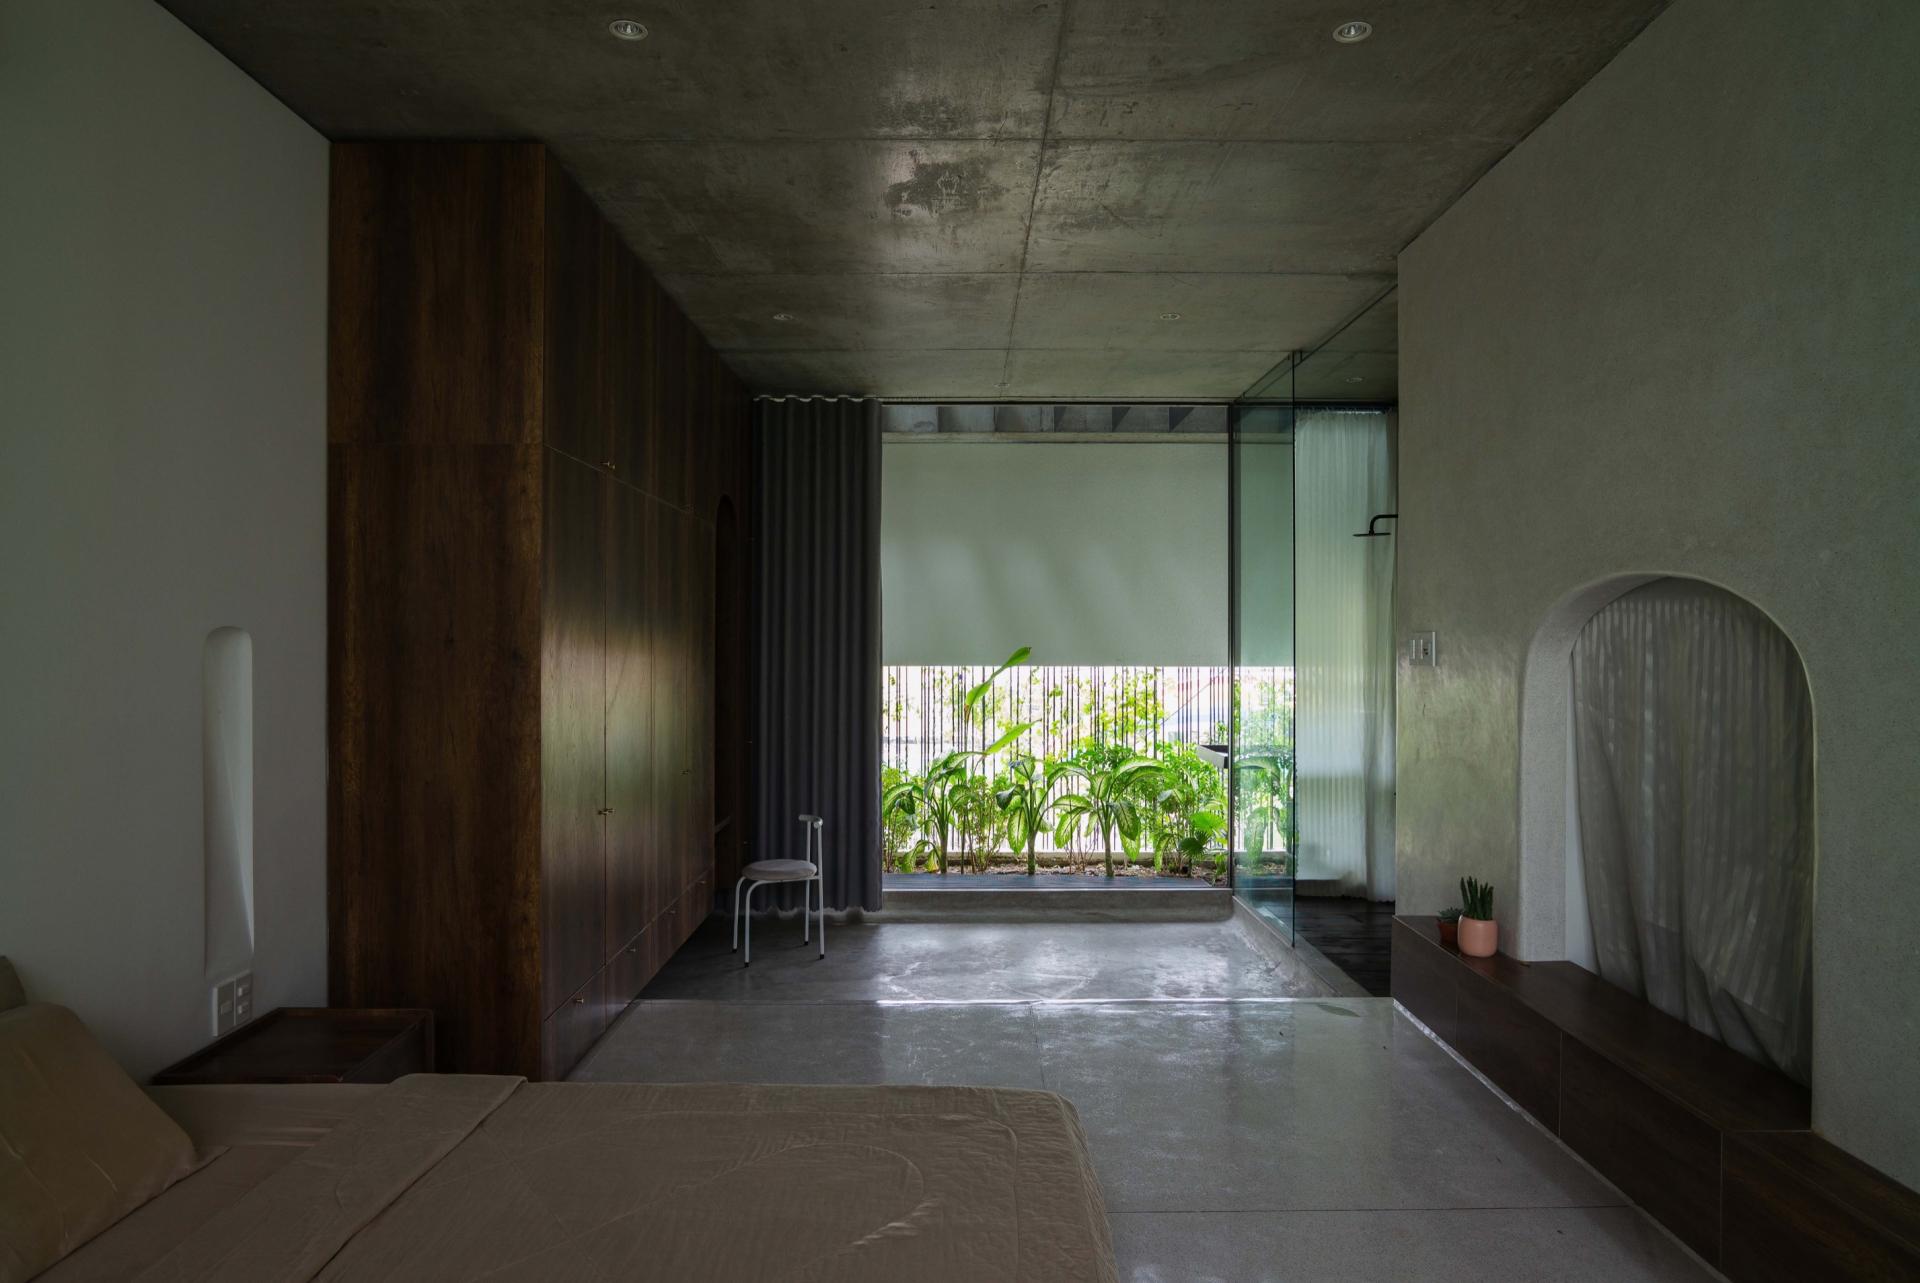 This home in Vietnam incorporates the essence of a botanical garden into its design